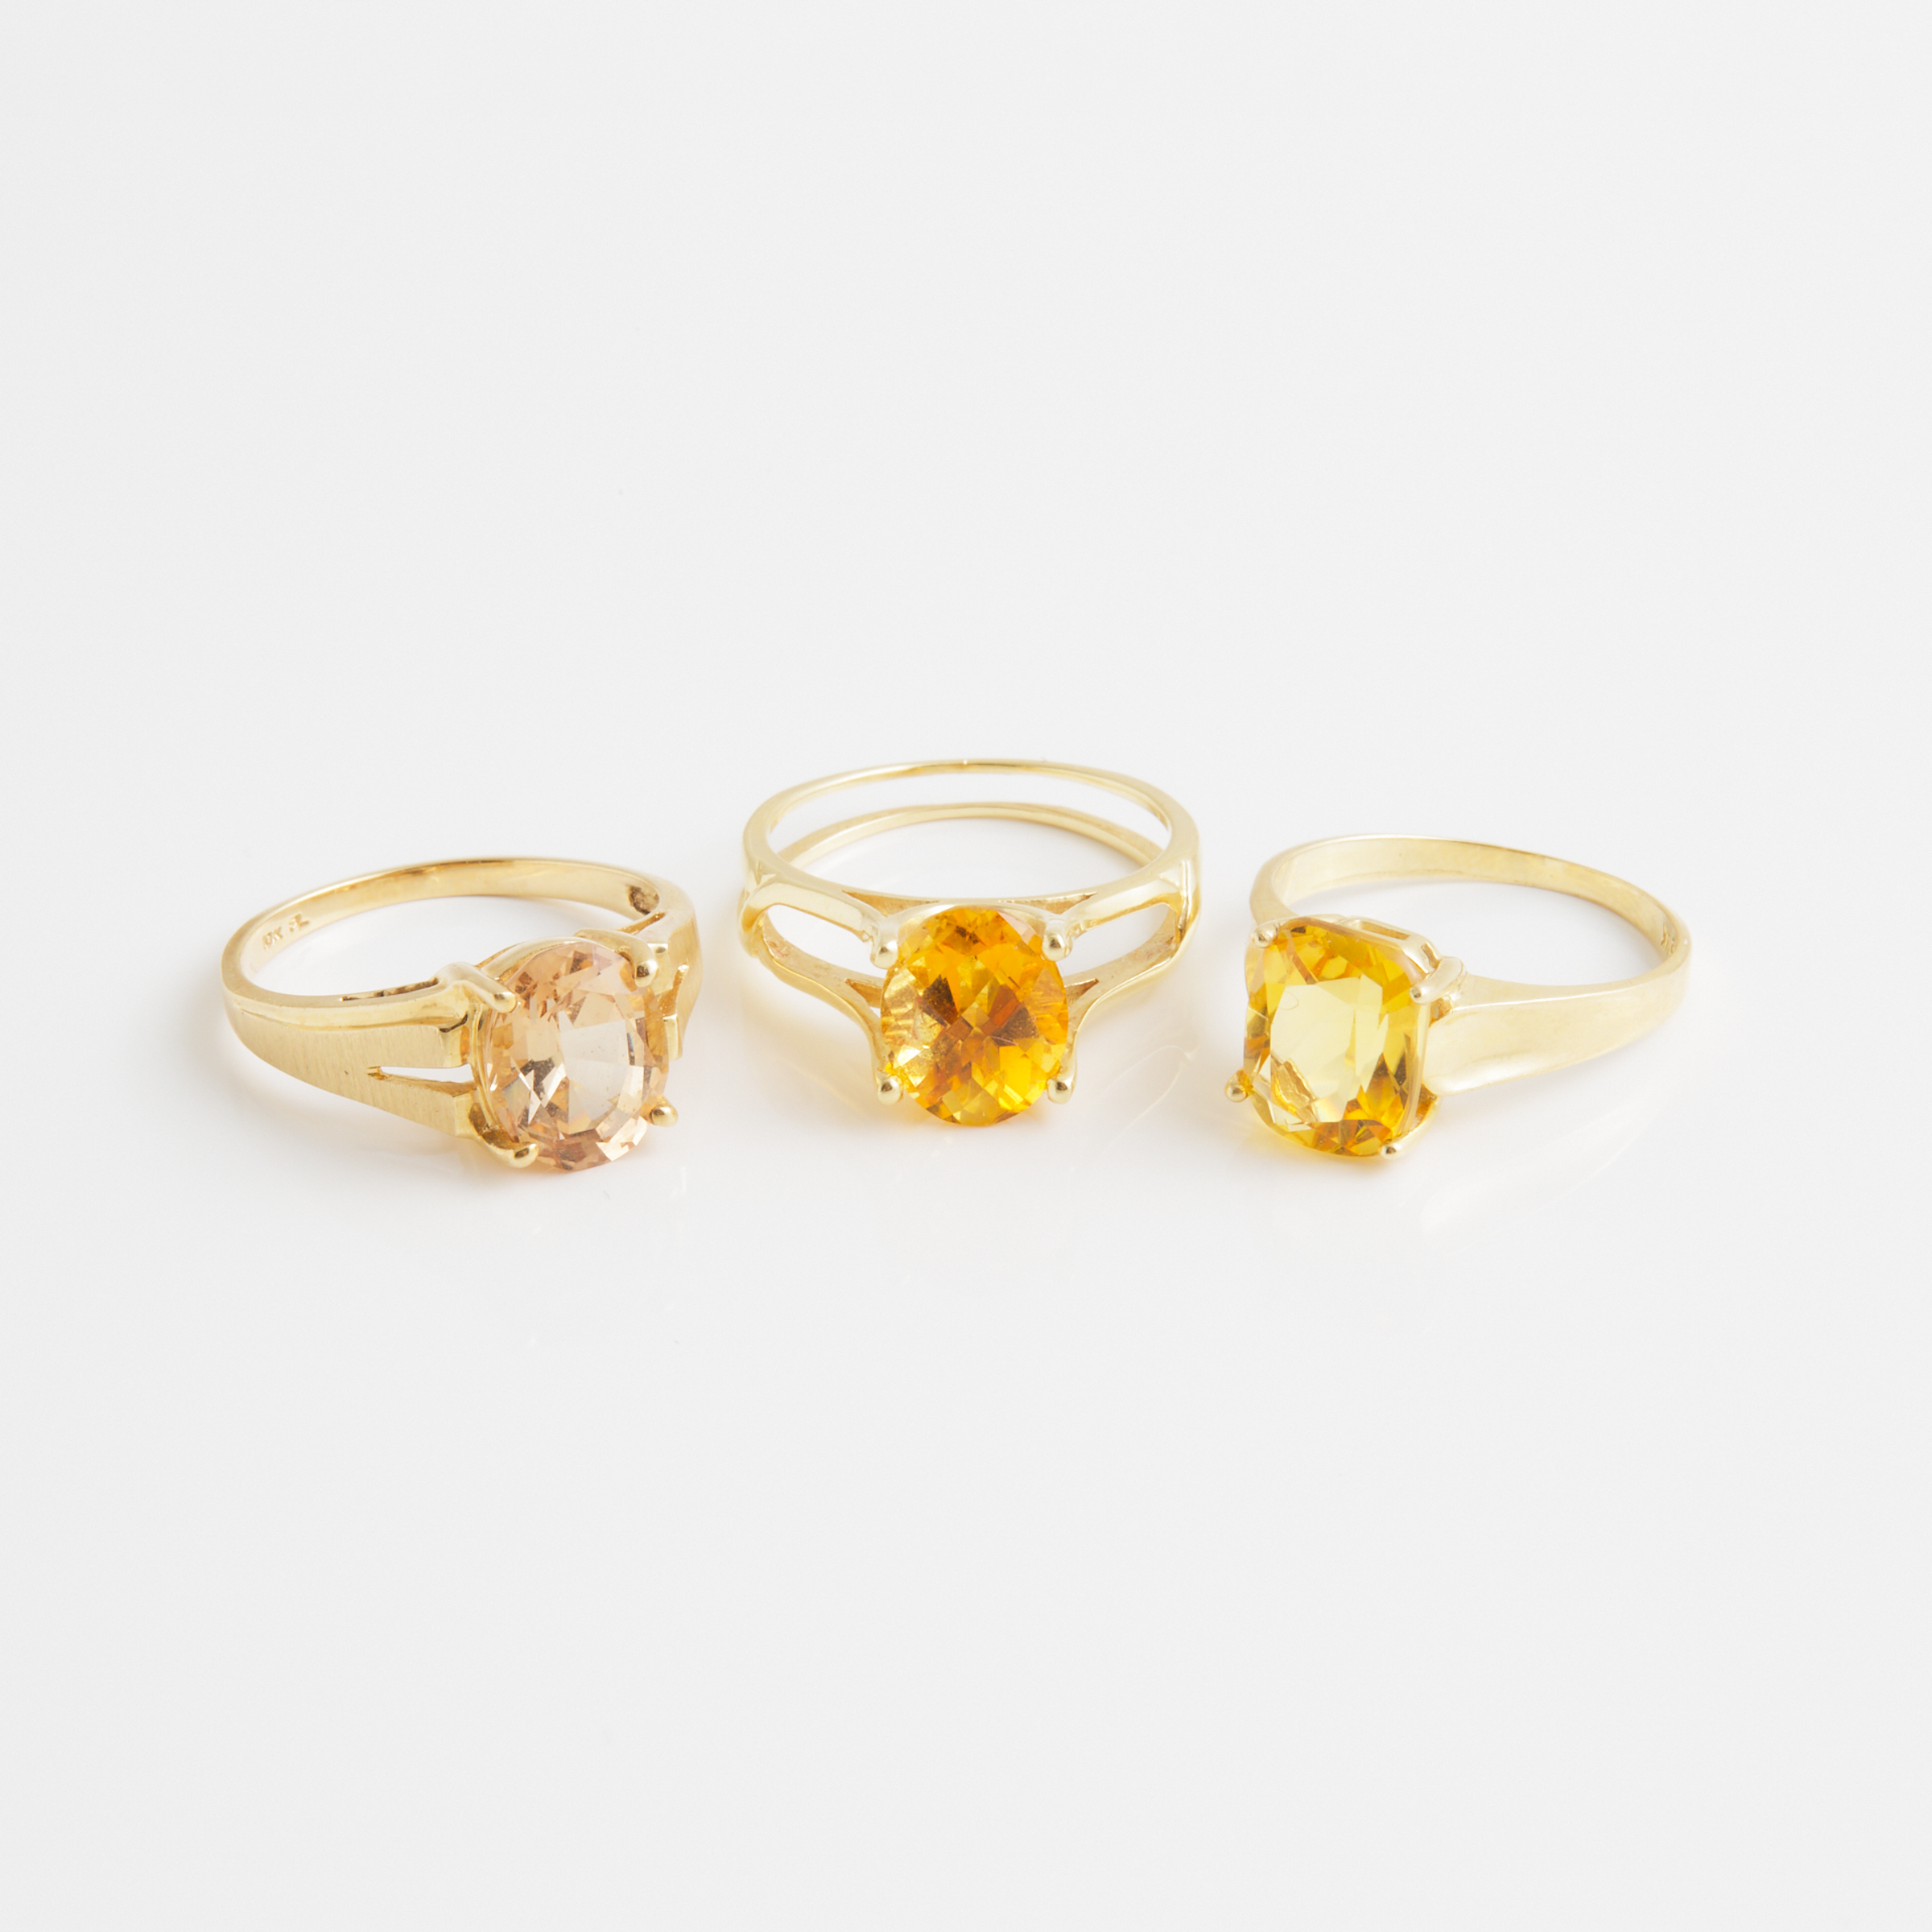 1 x 10k And 2 x 14k Yellow Gold Rings